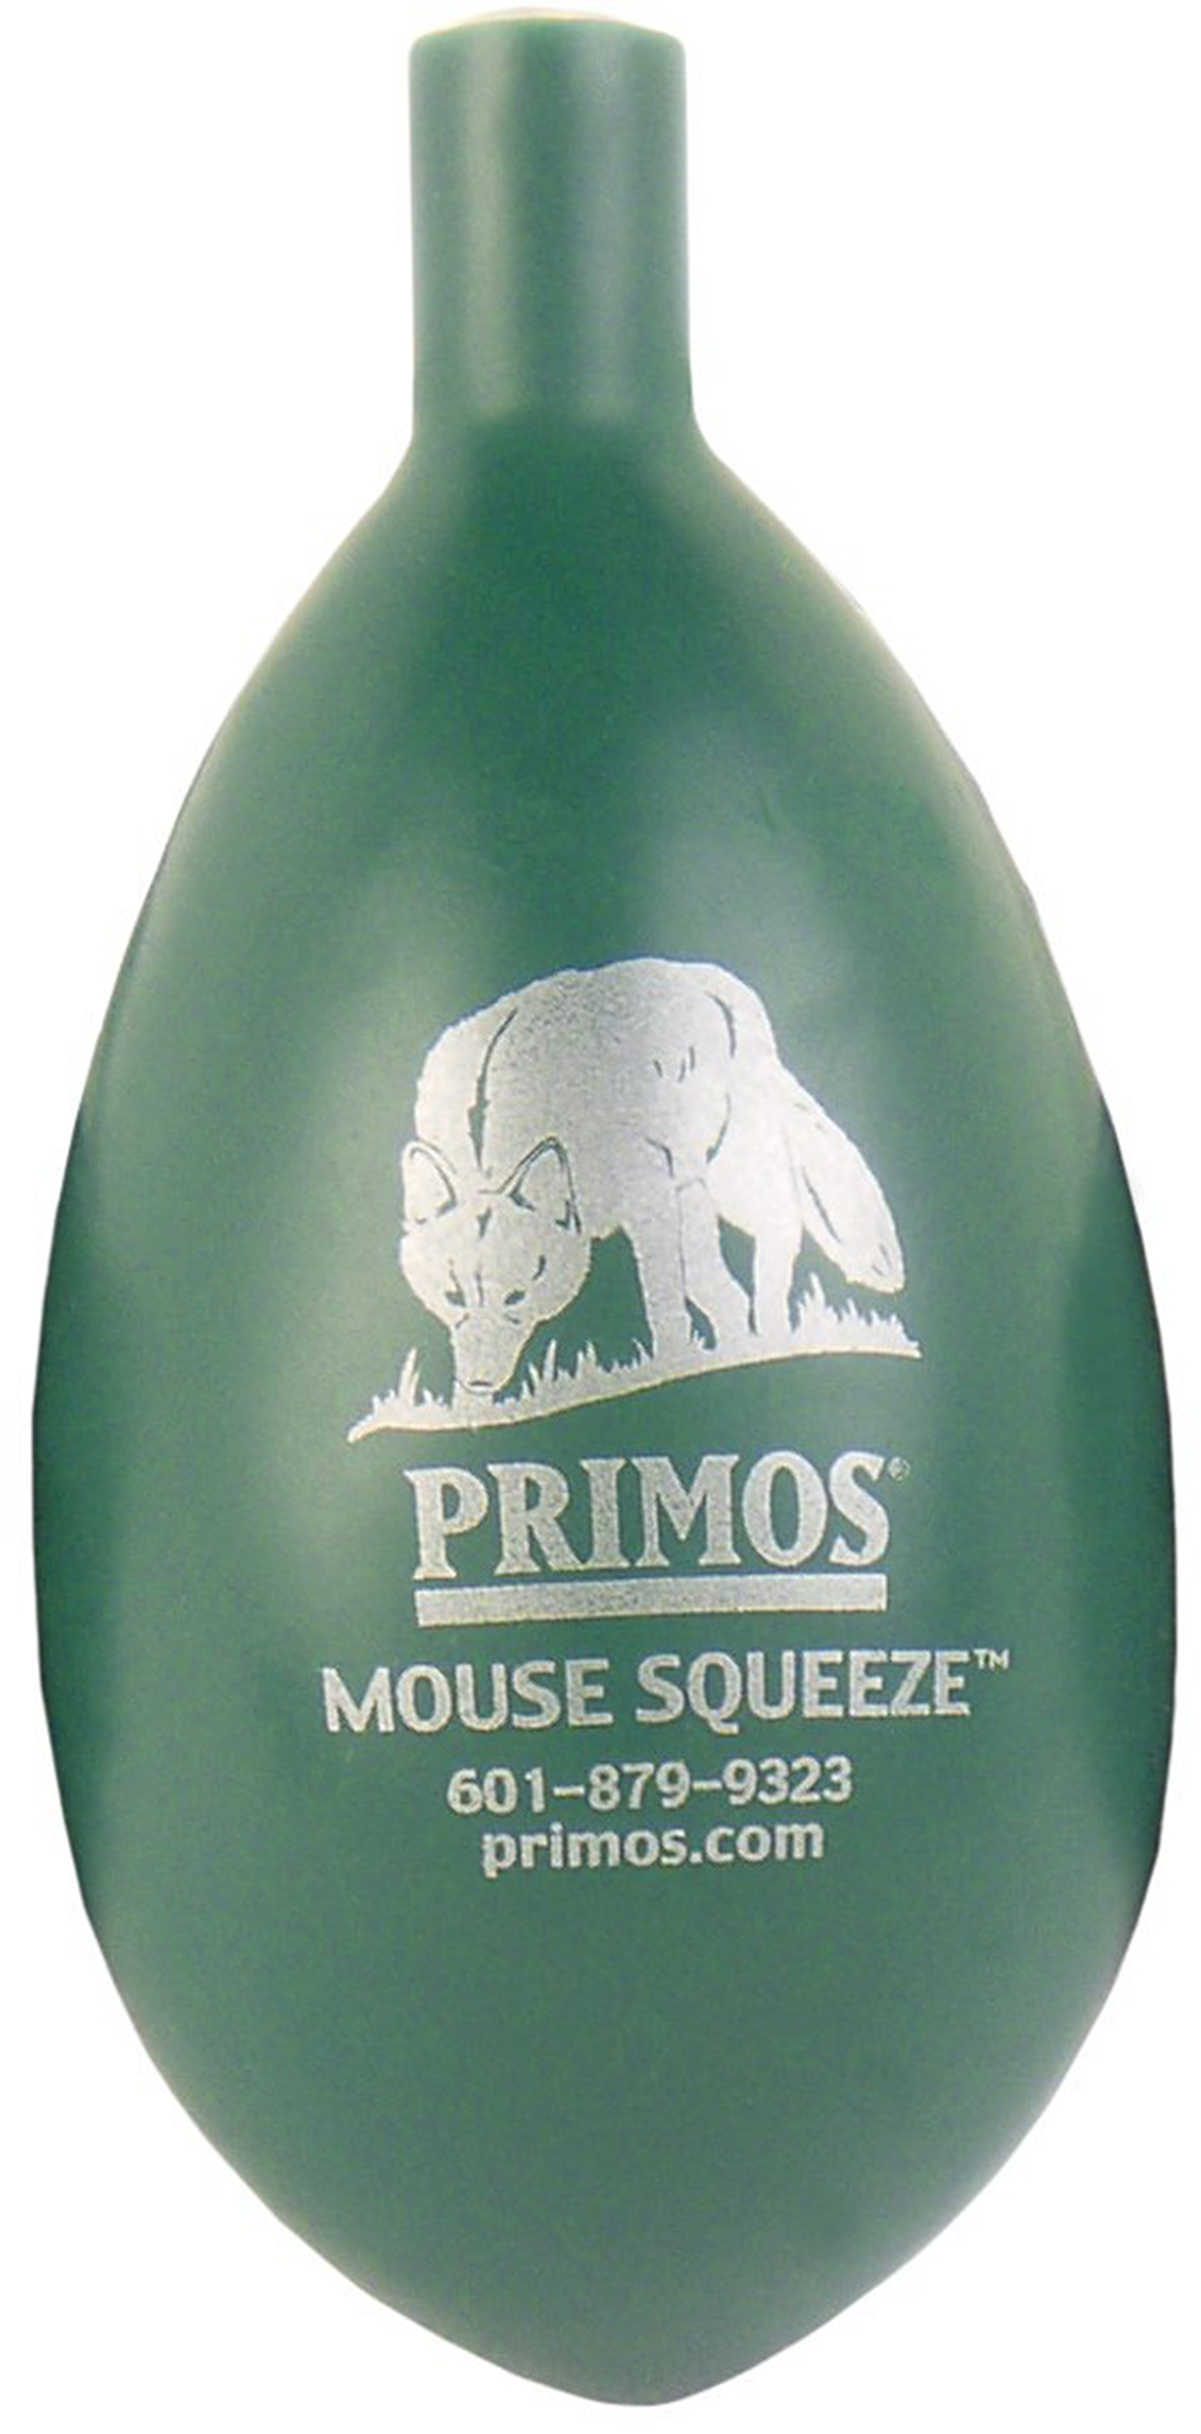 Prim 304 Mouse Squeeze Call